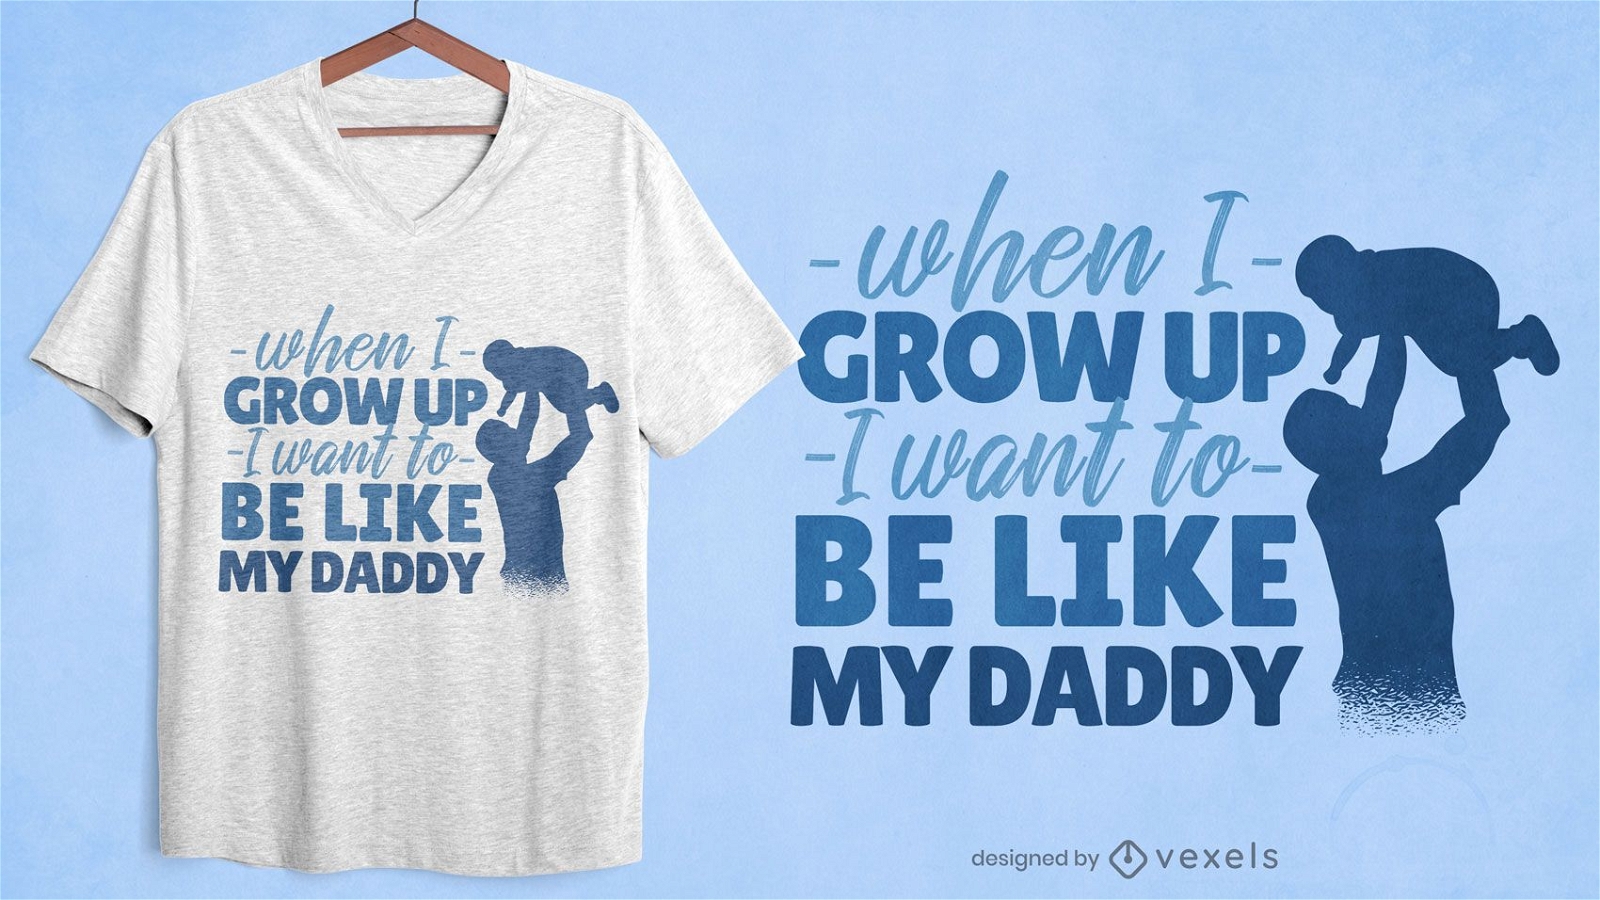 Like my dad quote t-shirt design